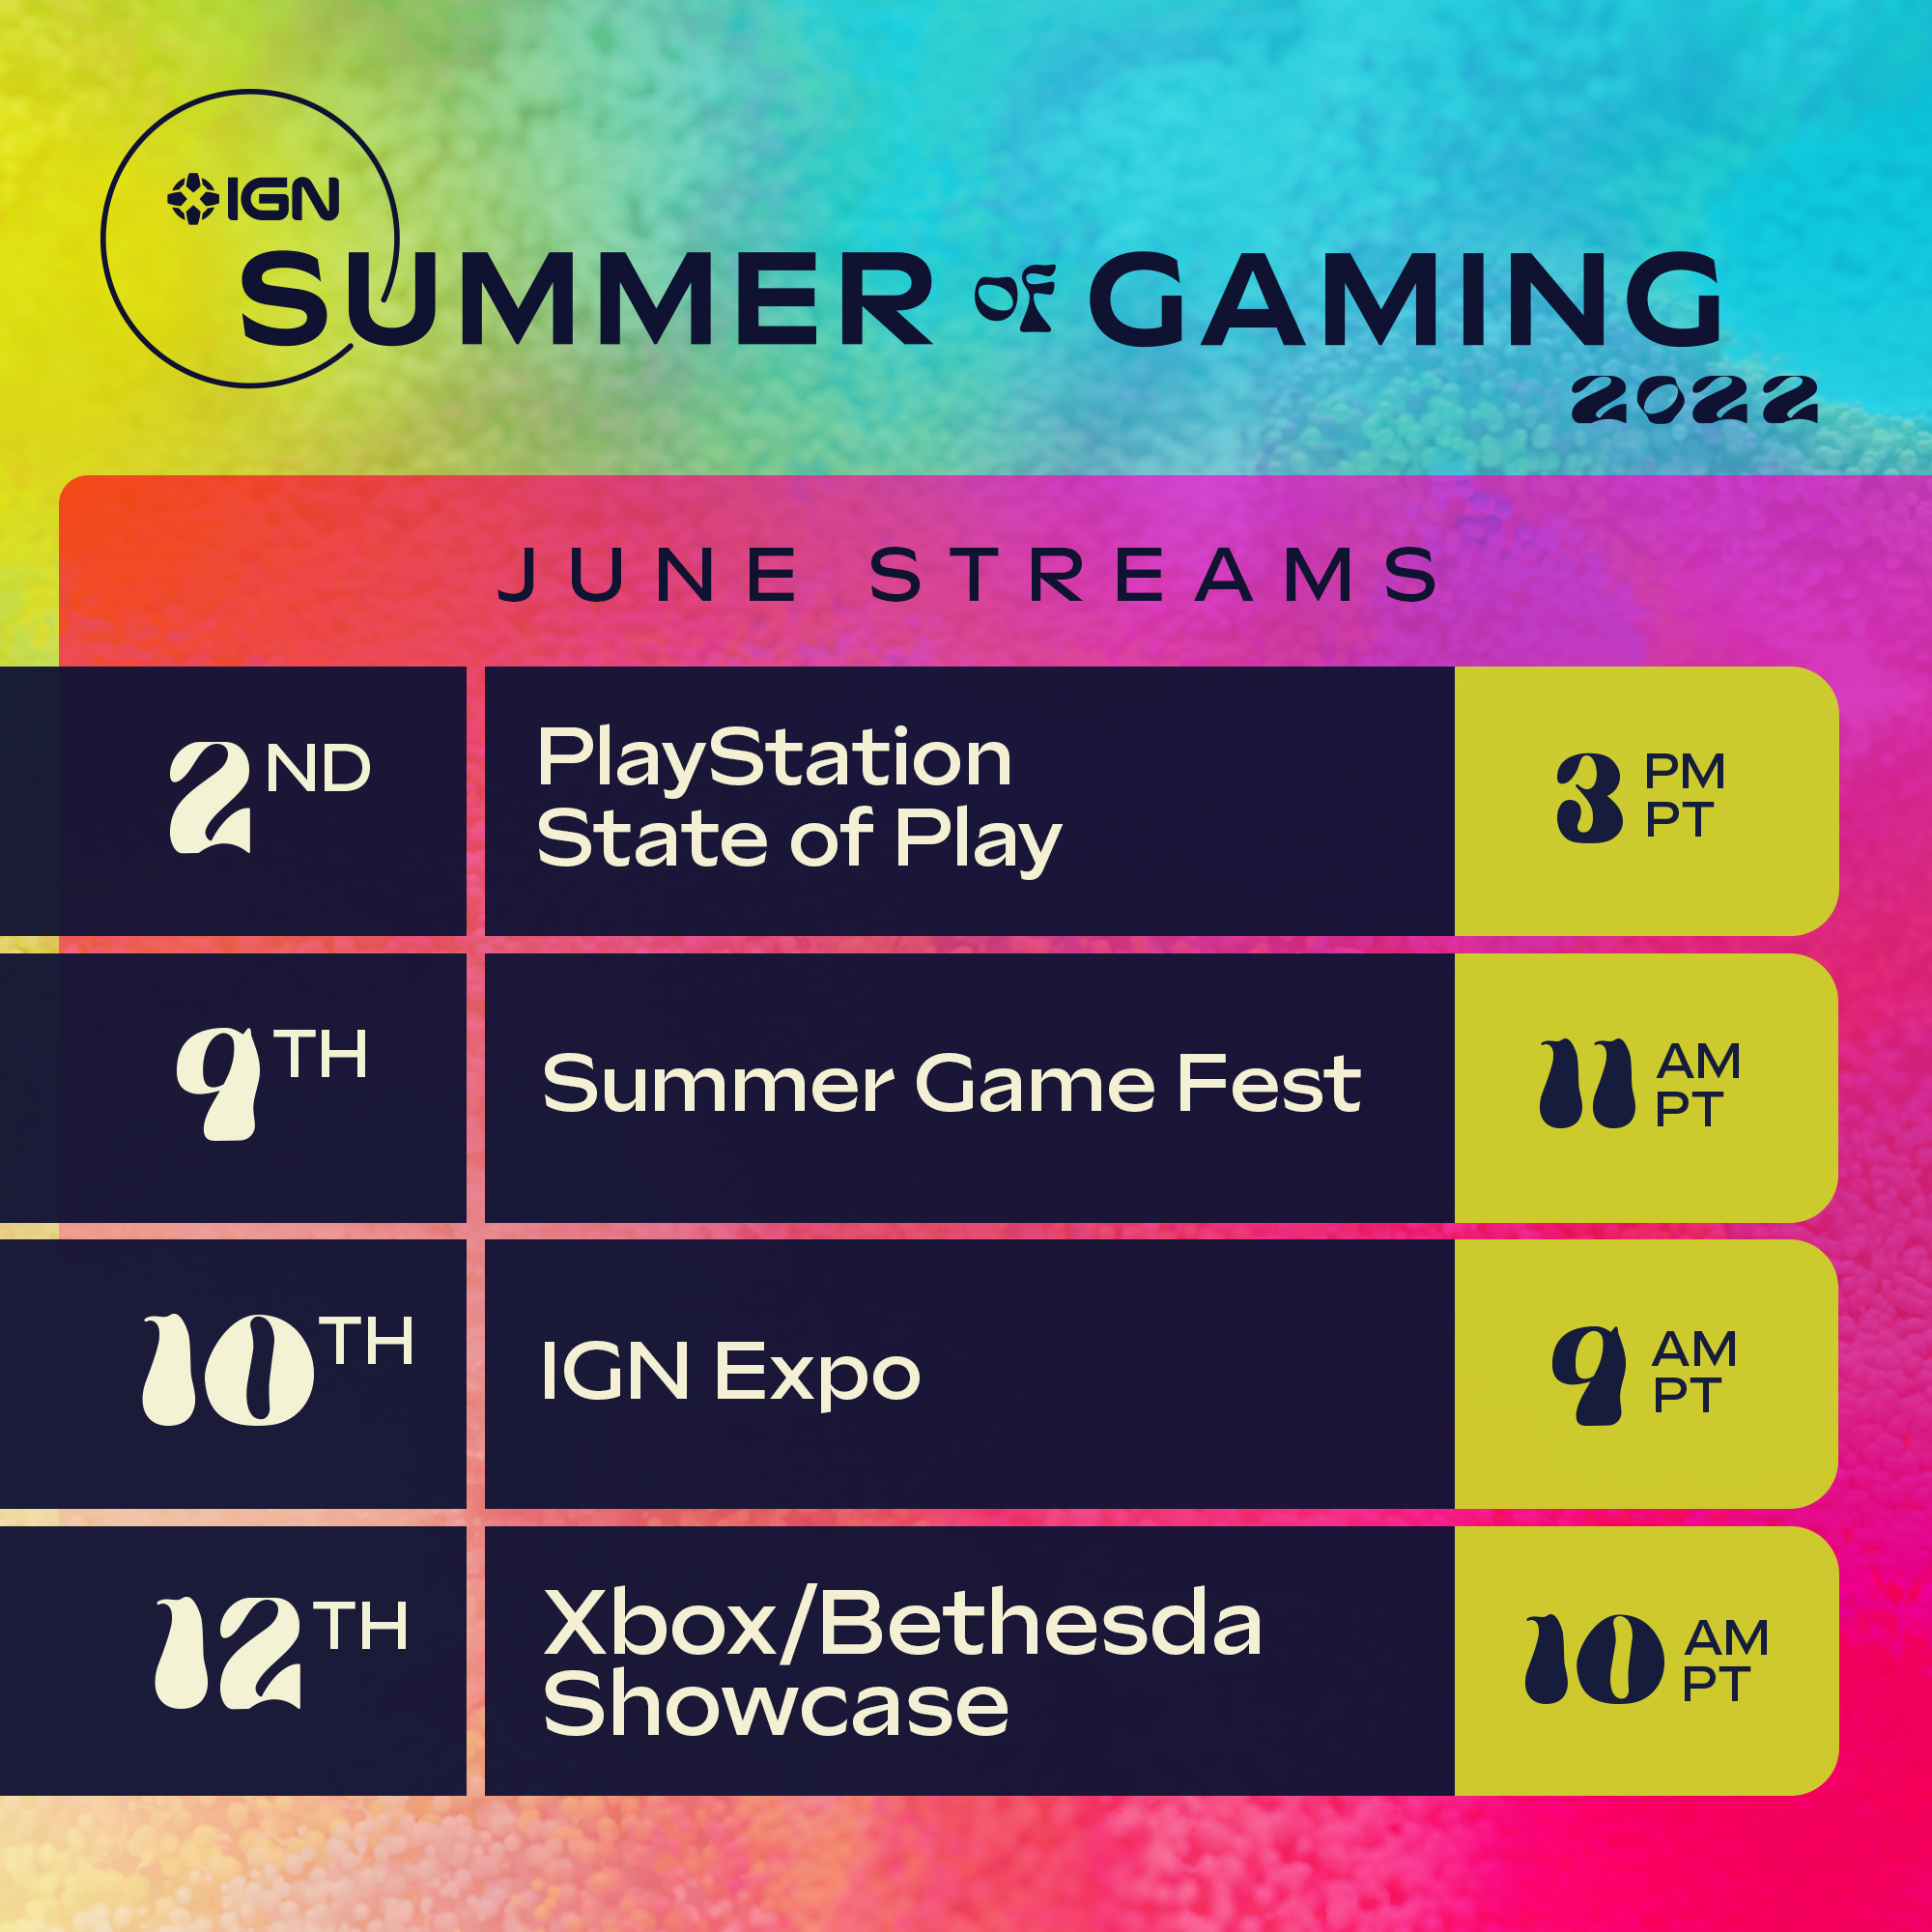 IGN on Twitter: "IGN Summer of 2022 is nearly here! 📅 From PlayStation to Xbox to IGN there are some big happening this year. Here's how and where to